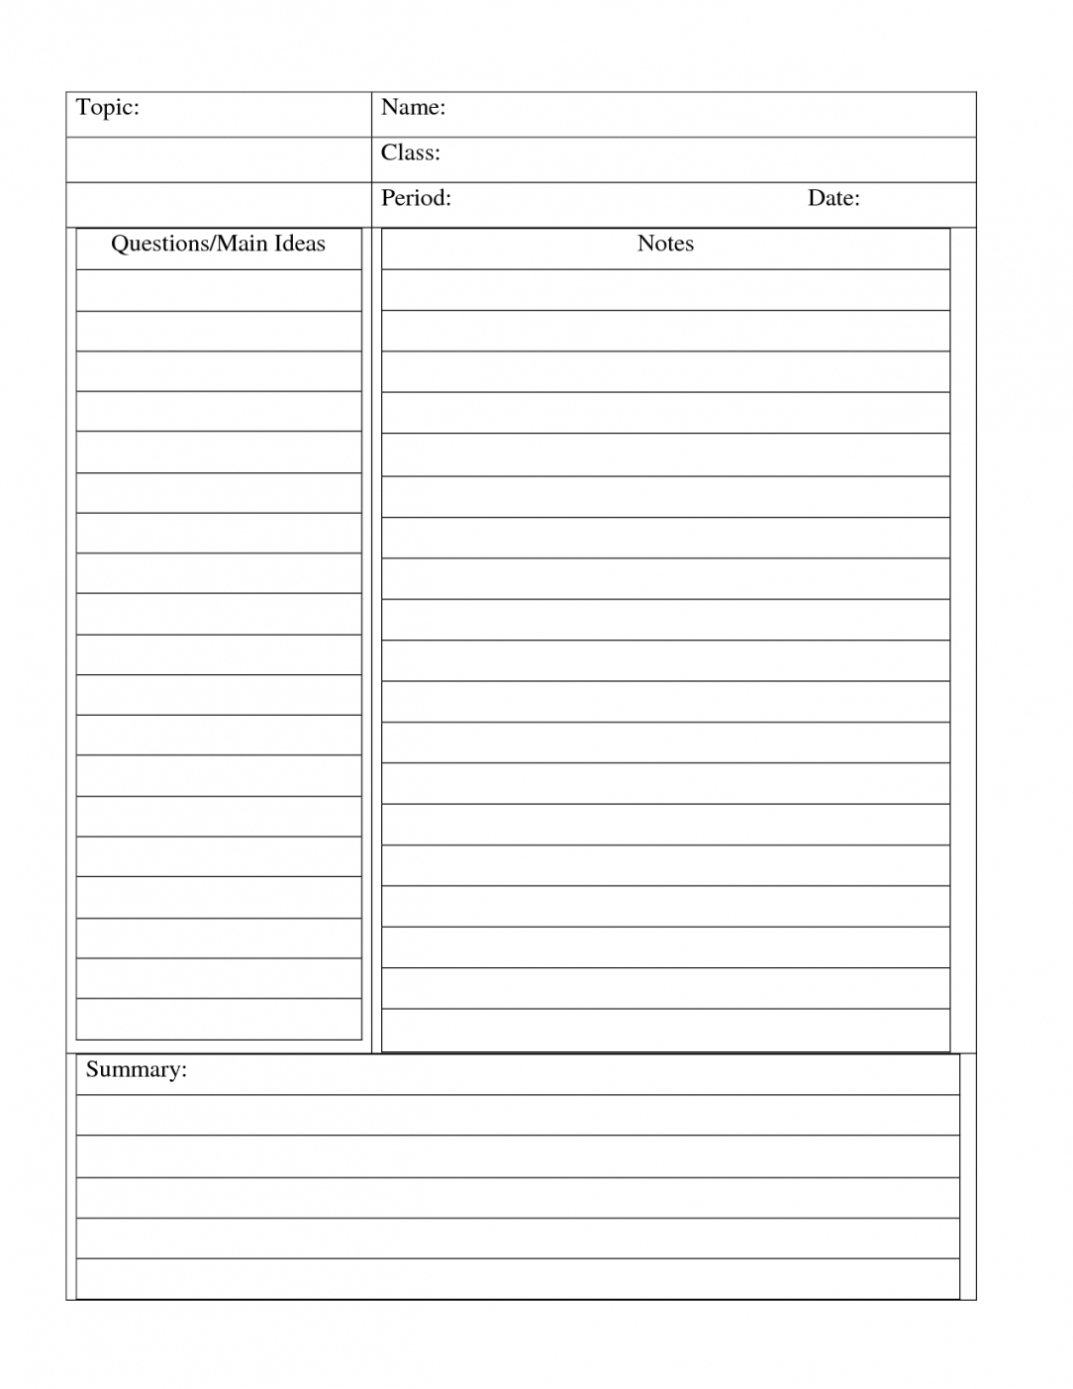 Cornell Notes Template Word Document | Free Resume Templates For Cornell Notes Template Word Document